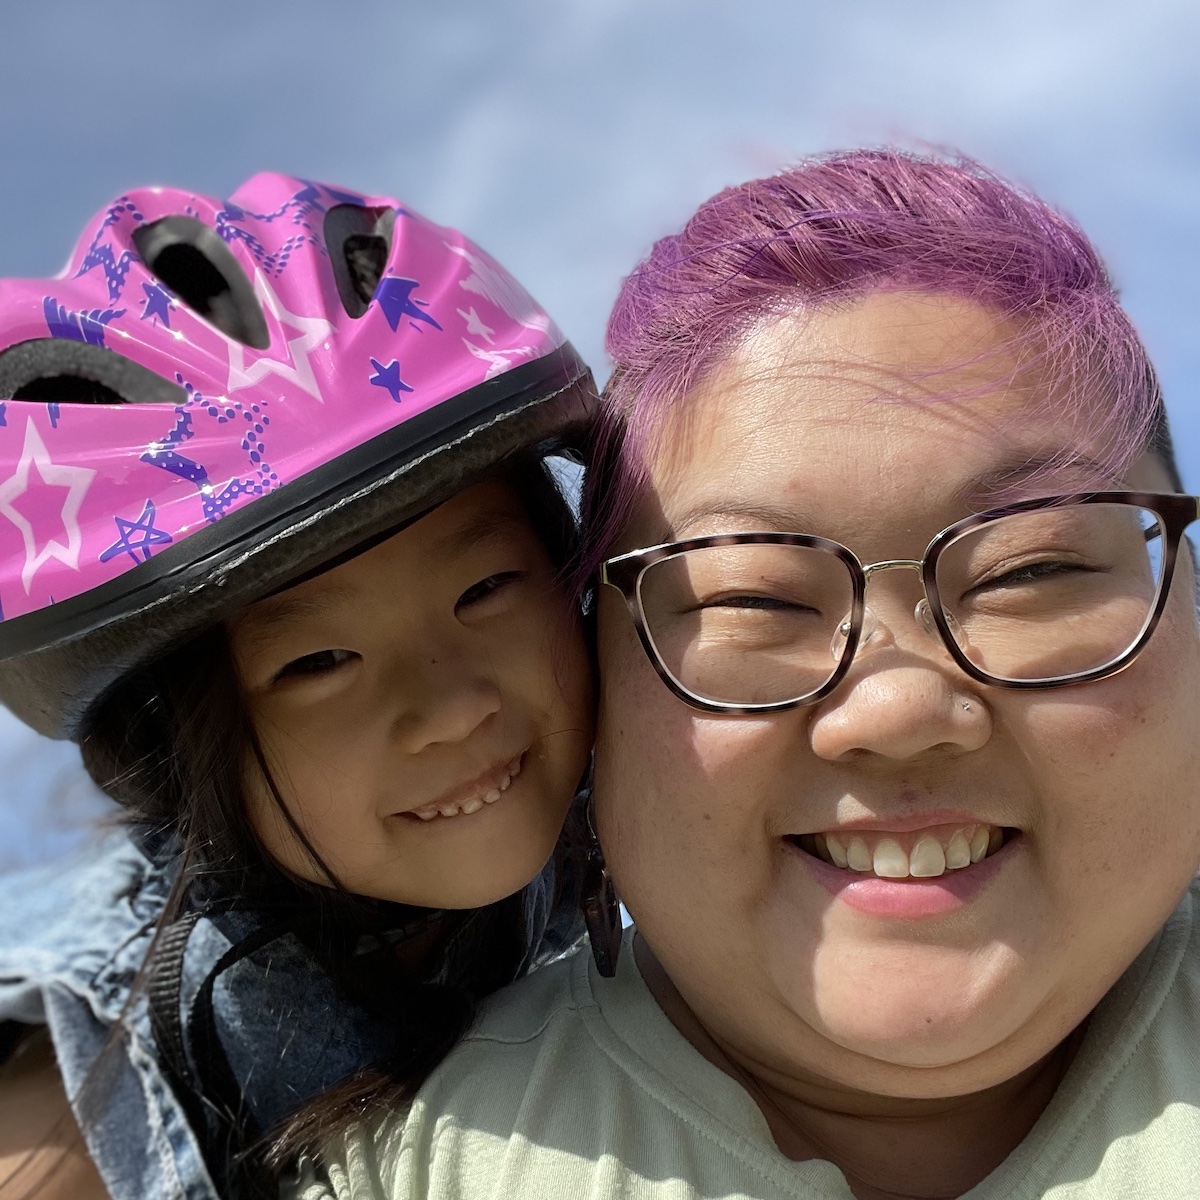 KaeLyn, an Asian woman with bright purple hair, smiles at the camera as her kid leans over her shoulder and smiles while wearing a bright pink bicycle helmet.